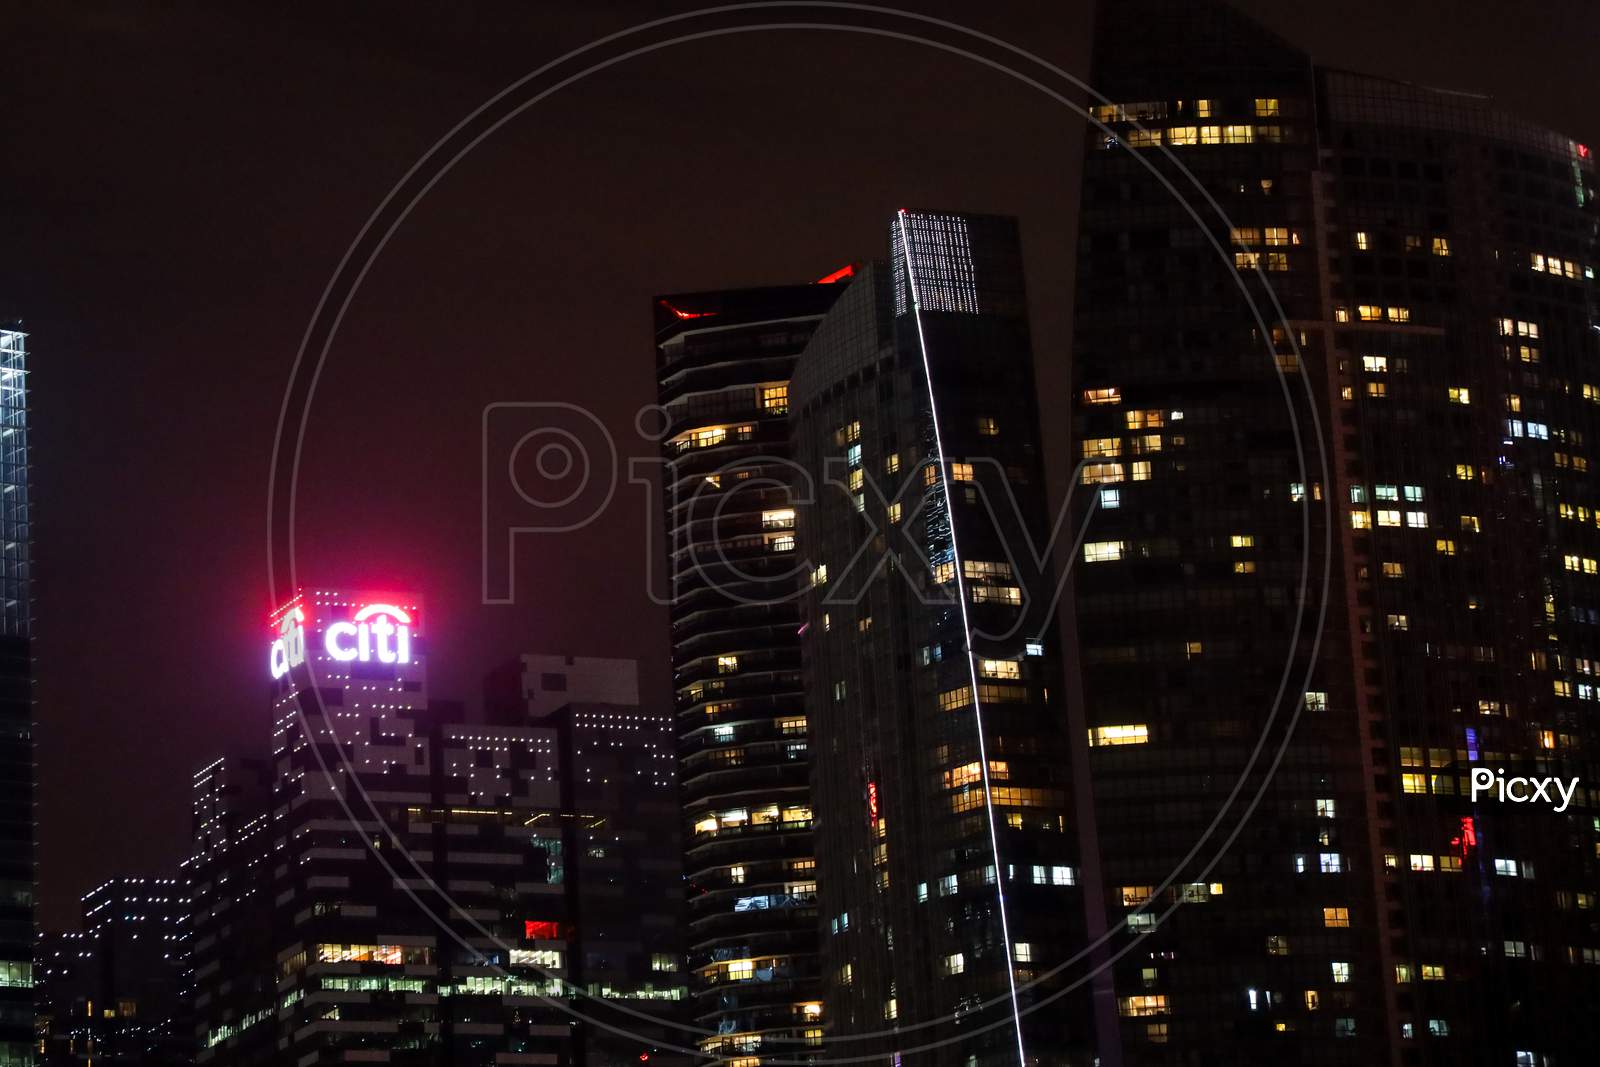 Citi Bank Corporate Building At Marina Bay Sands in Singapore